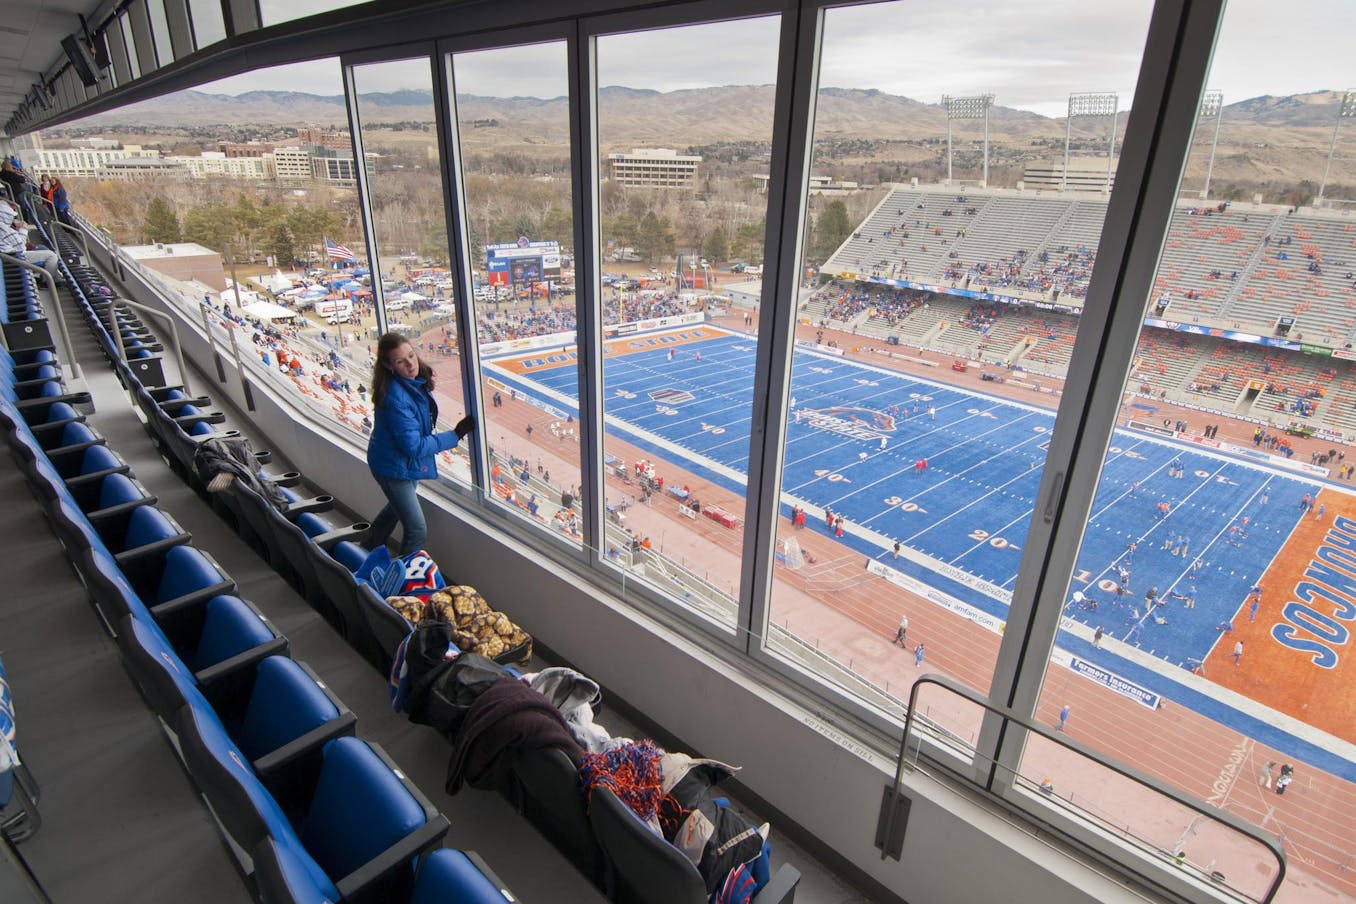 HSW60 sliding glass walls at the Boise State Stadium